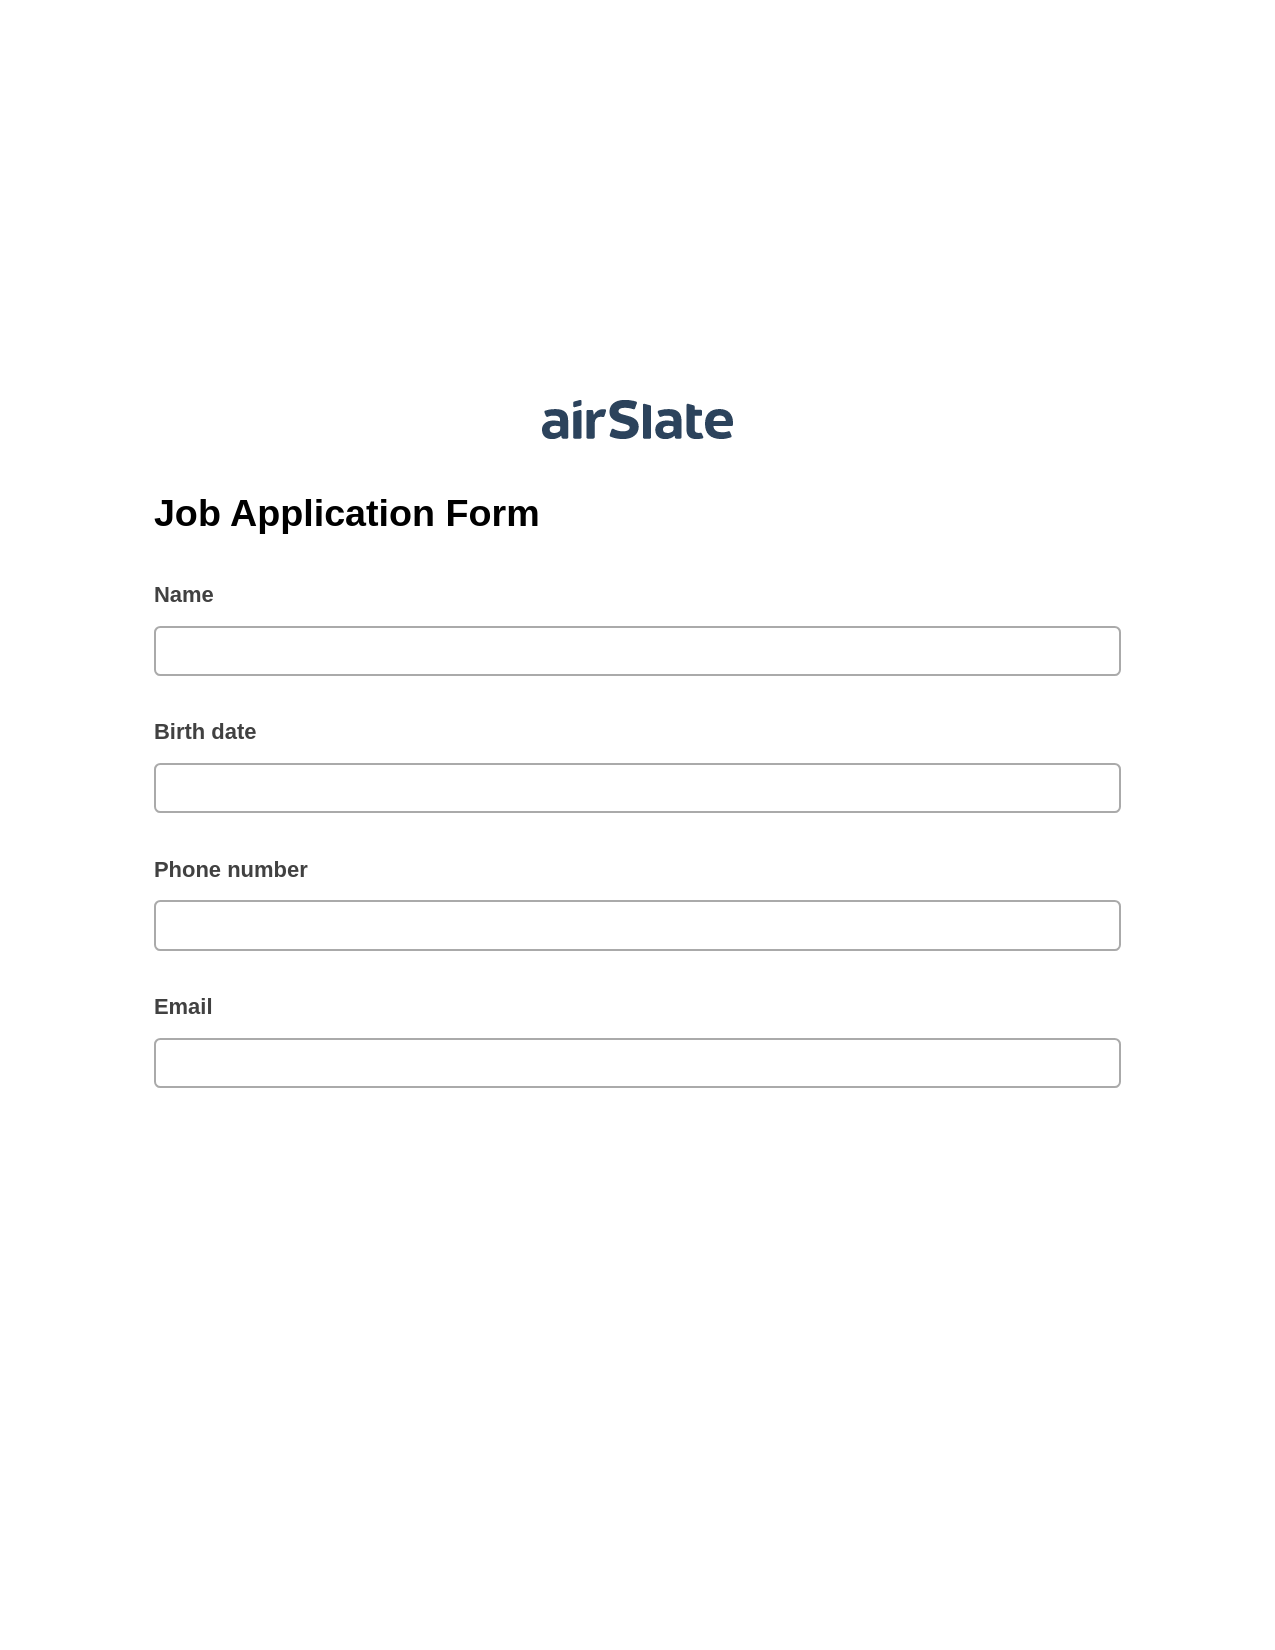 Job Application Form Pre-fill from Google Sheet Dropdown Options Bot, Update NetSuite Records Bot, Export to Google Sheet Bot